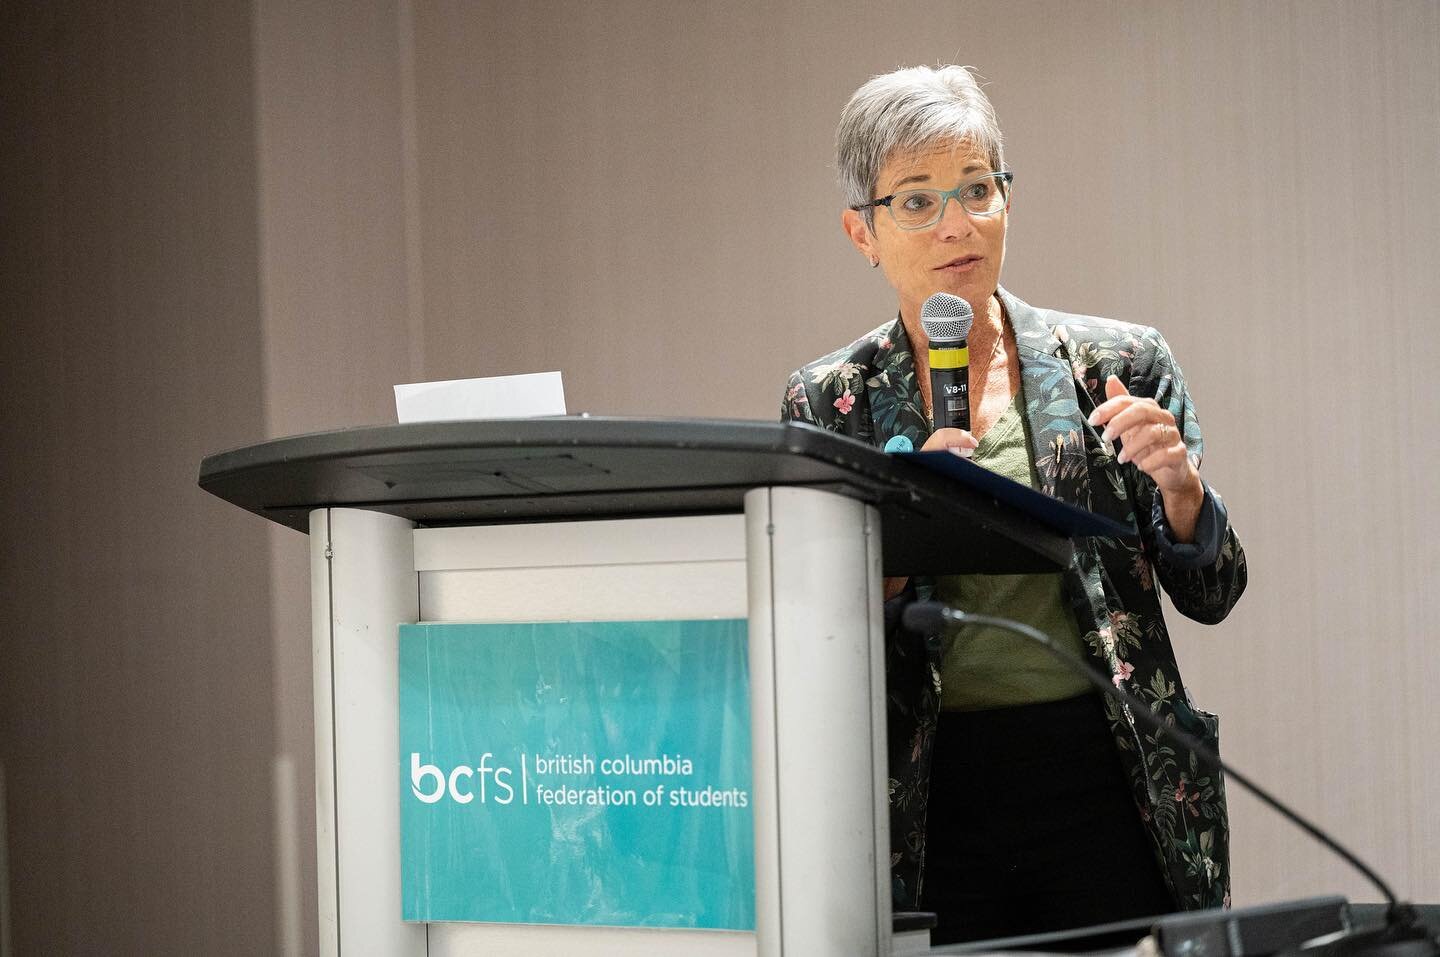 Day 2: Delegates heard from the Minister of Post-Secondary Education and Future Skills, and other speakers on the second day of our AGM. Sessions included a look at how inflation is impacting young people in BC, Redefining Success and the Federation&